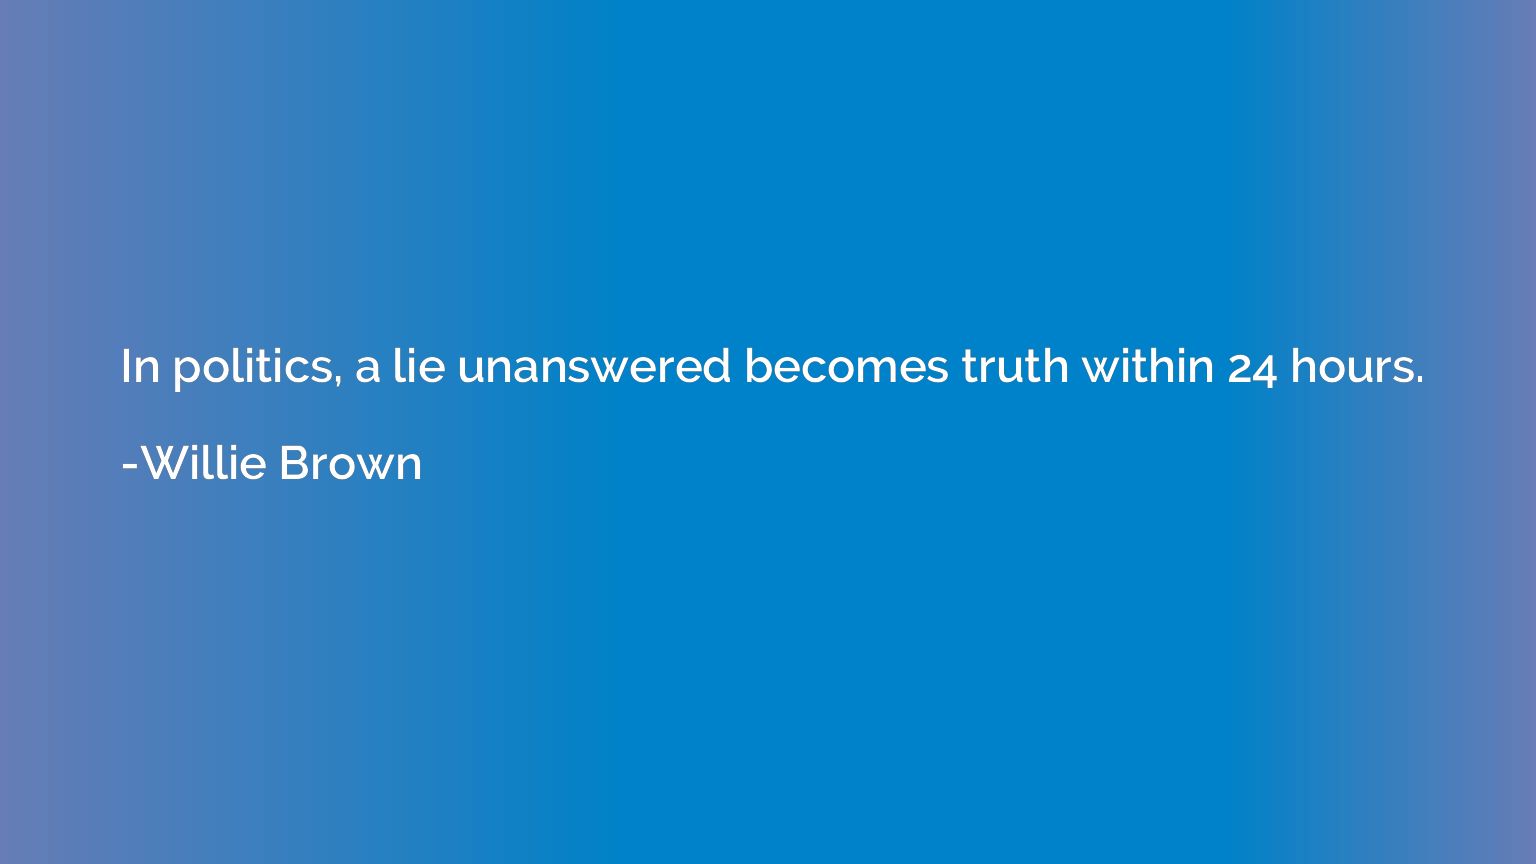 In politics, a lie unanswered becomes truth within 24 hours.